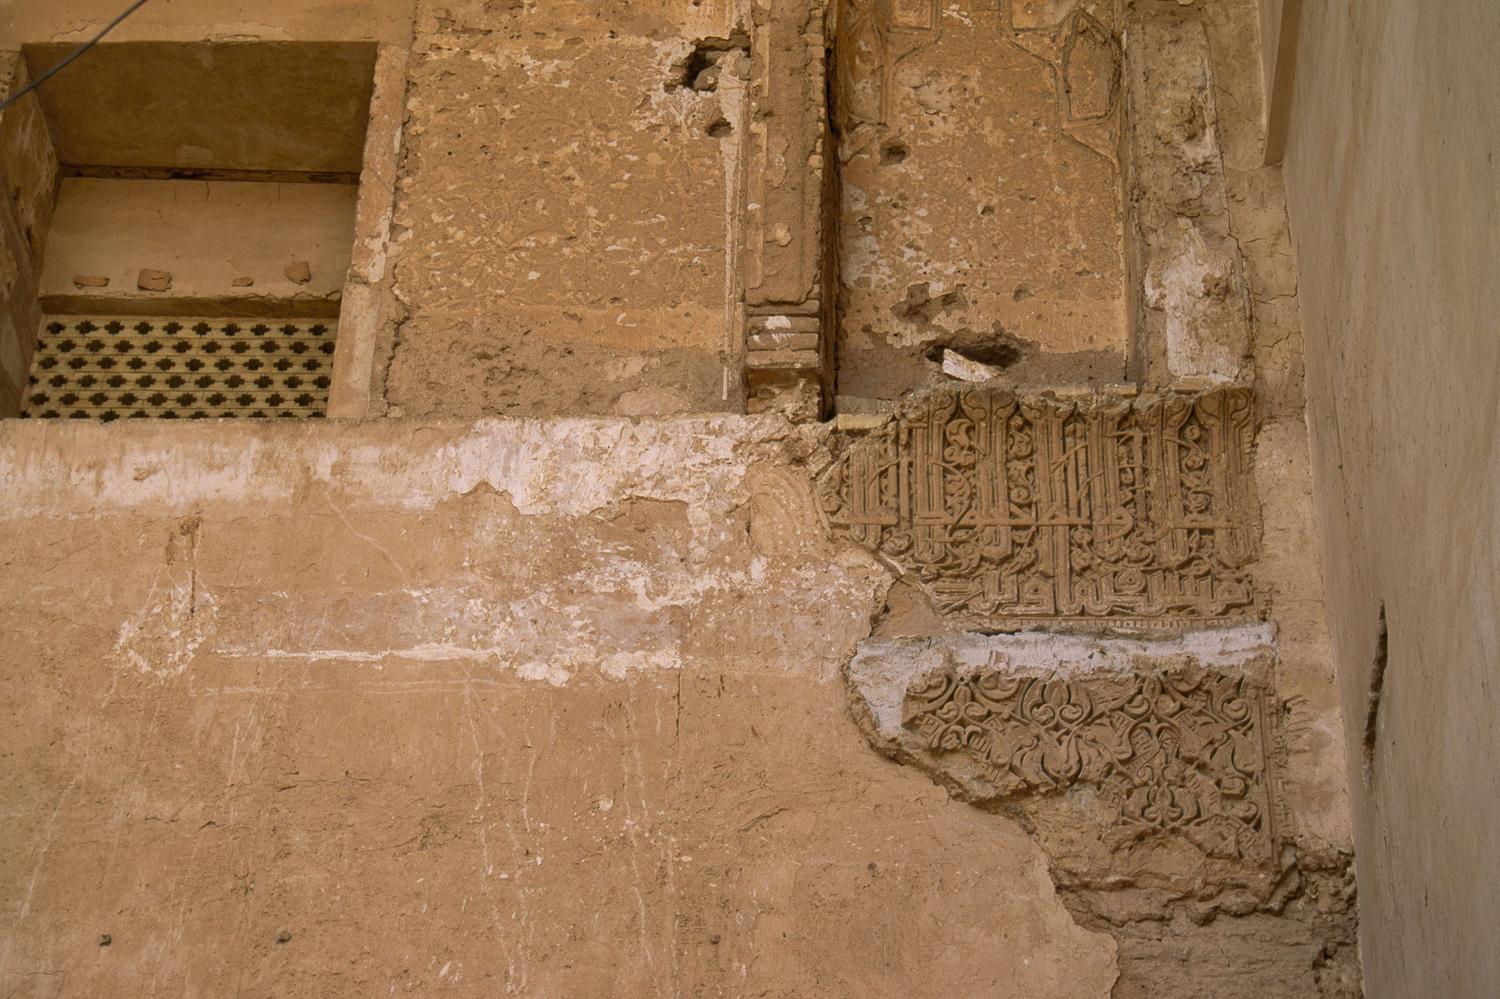 Detail of the back wall of the iwan, with carved stucco fragments